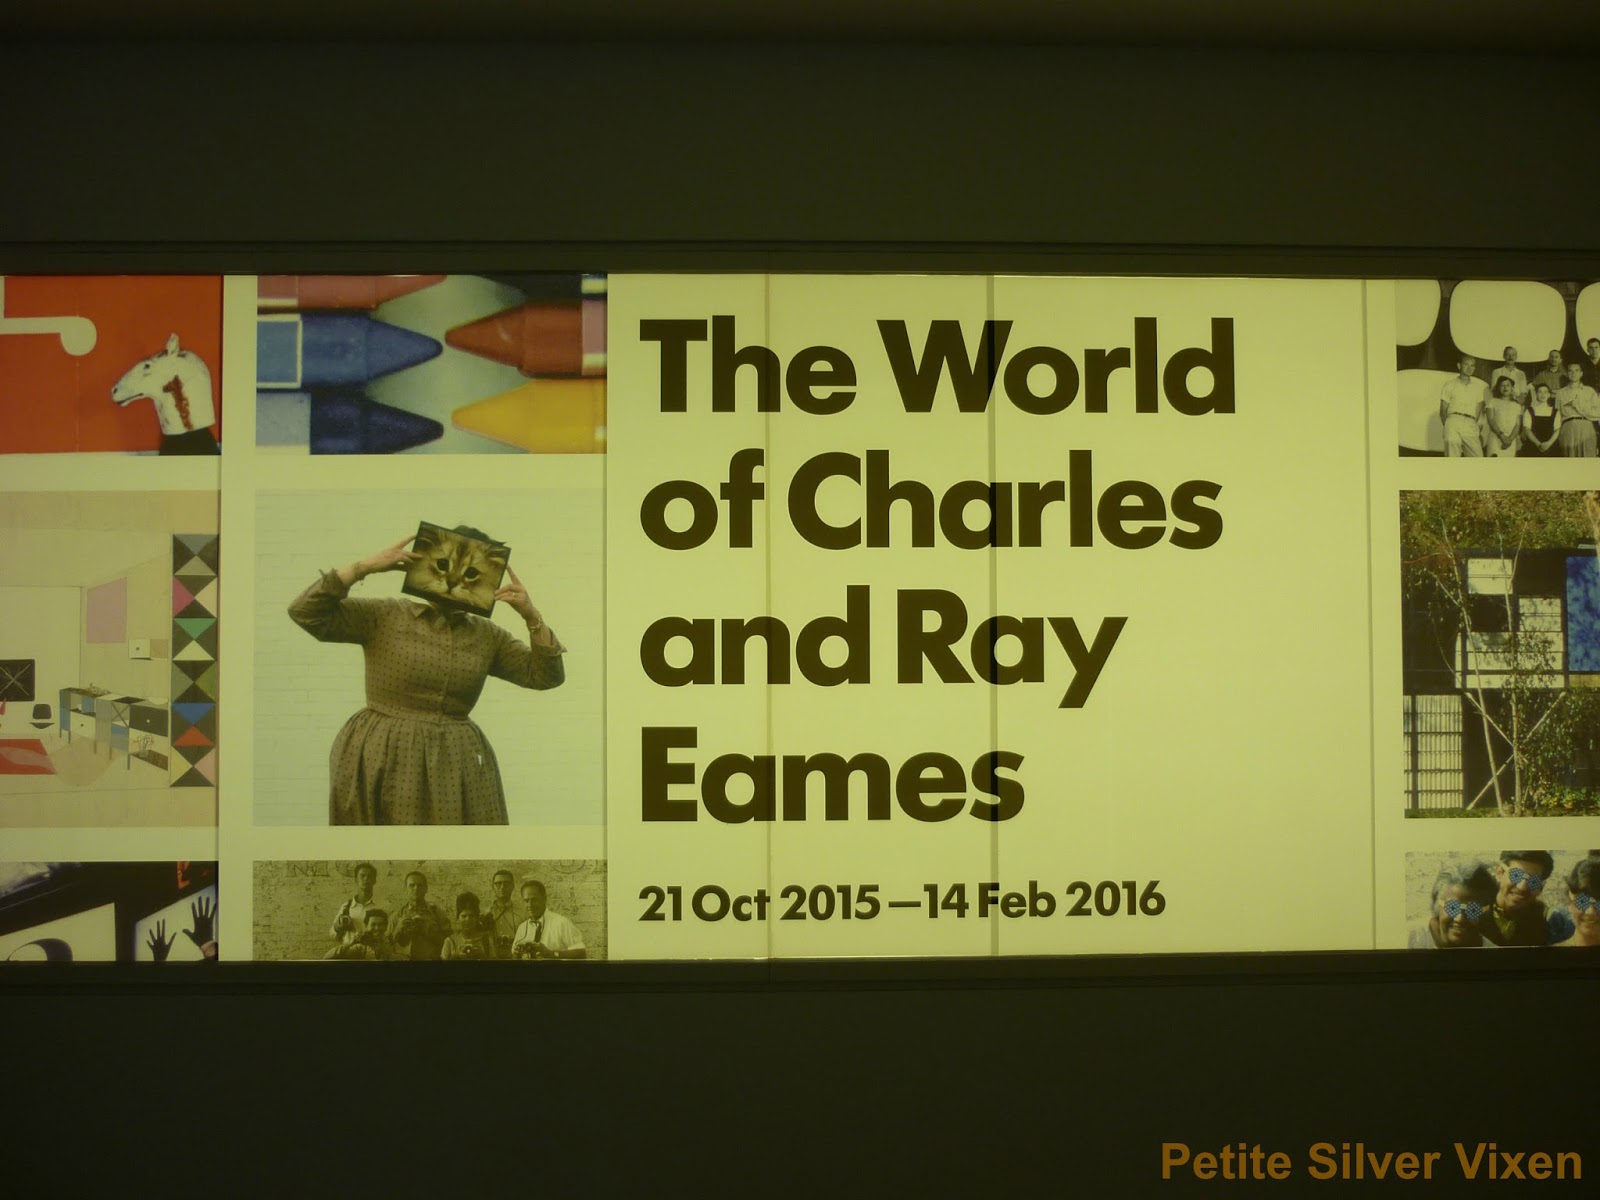 Exhibition sign of The World of Charles and Ray Eames at the Barbican | Petite Silver Vixen